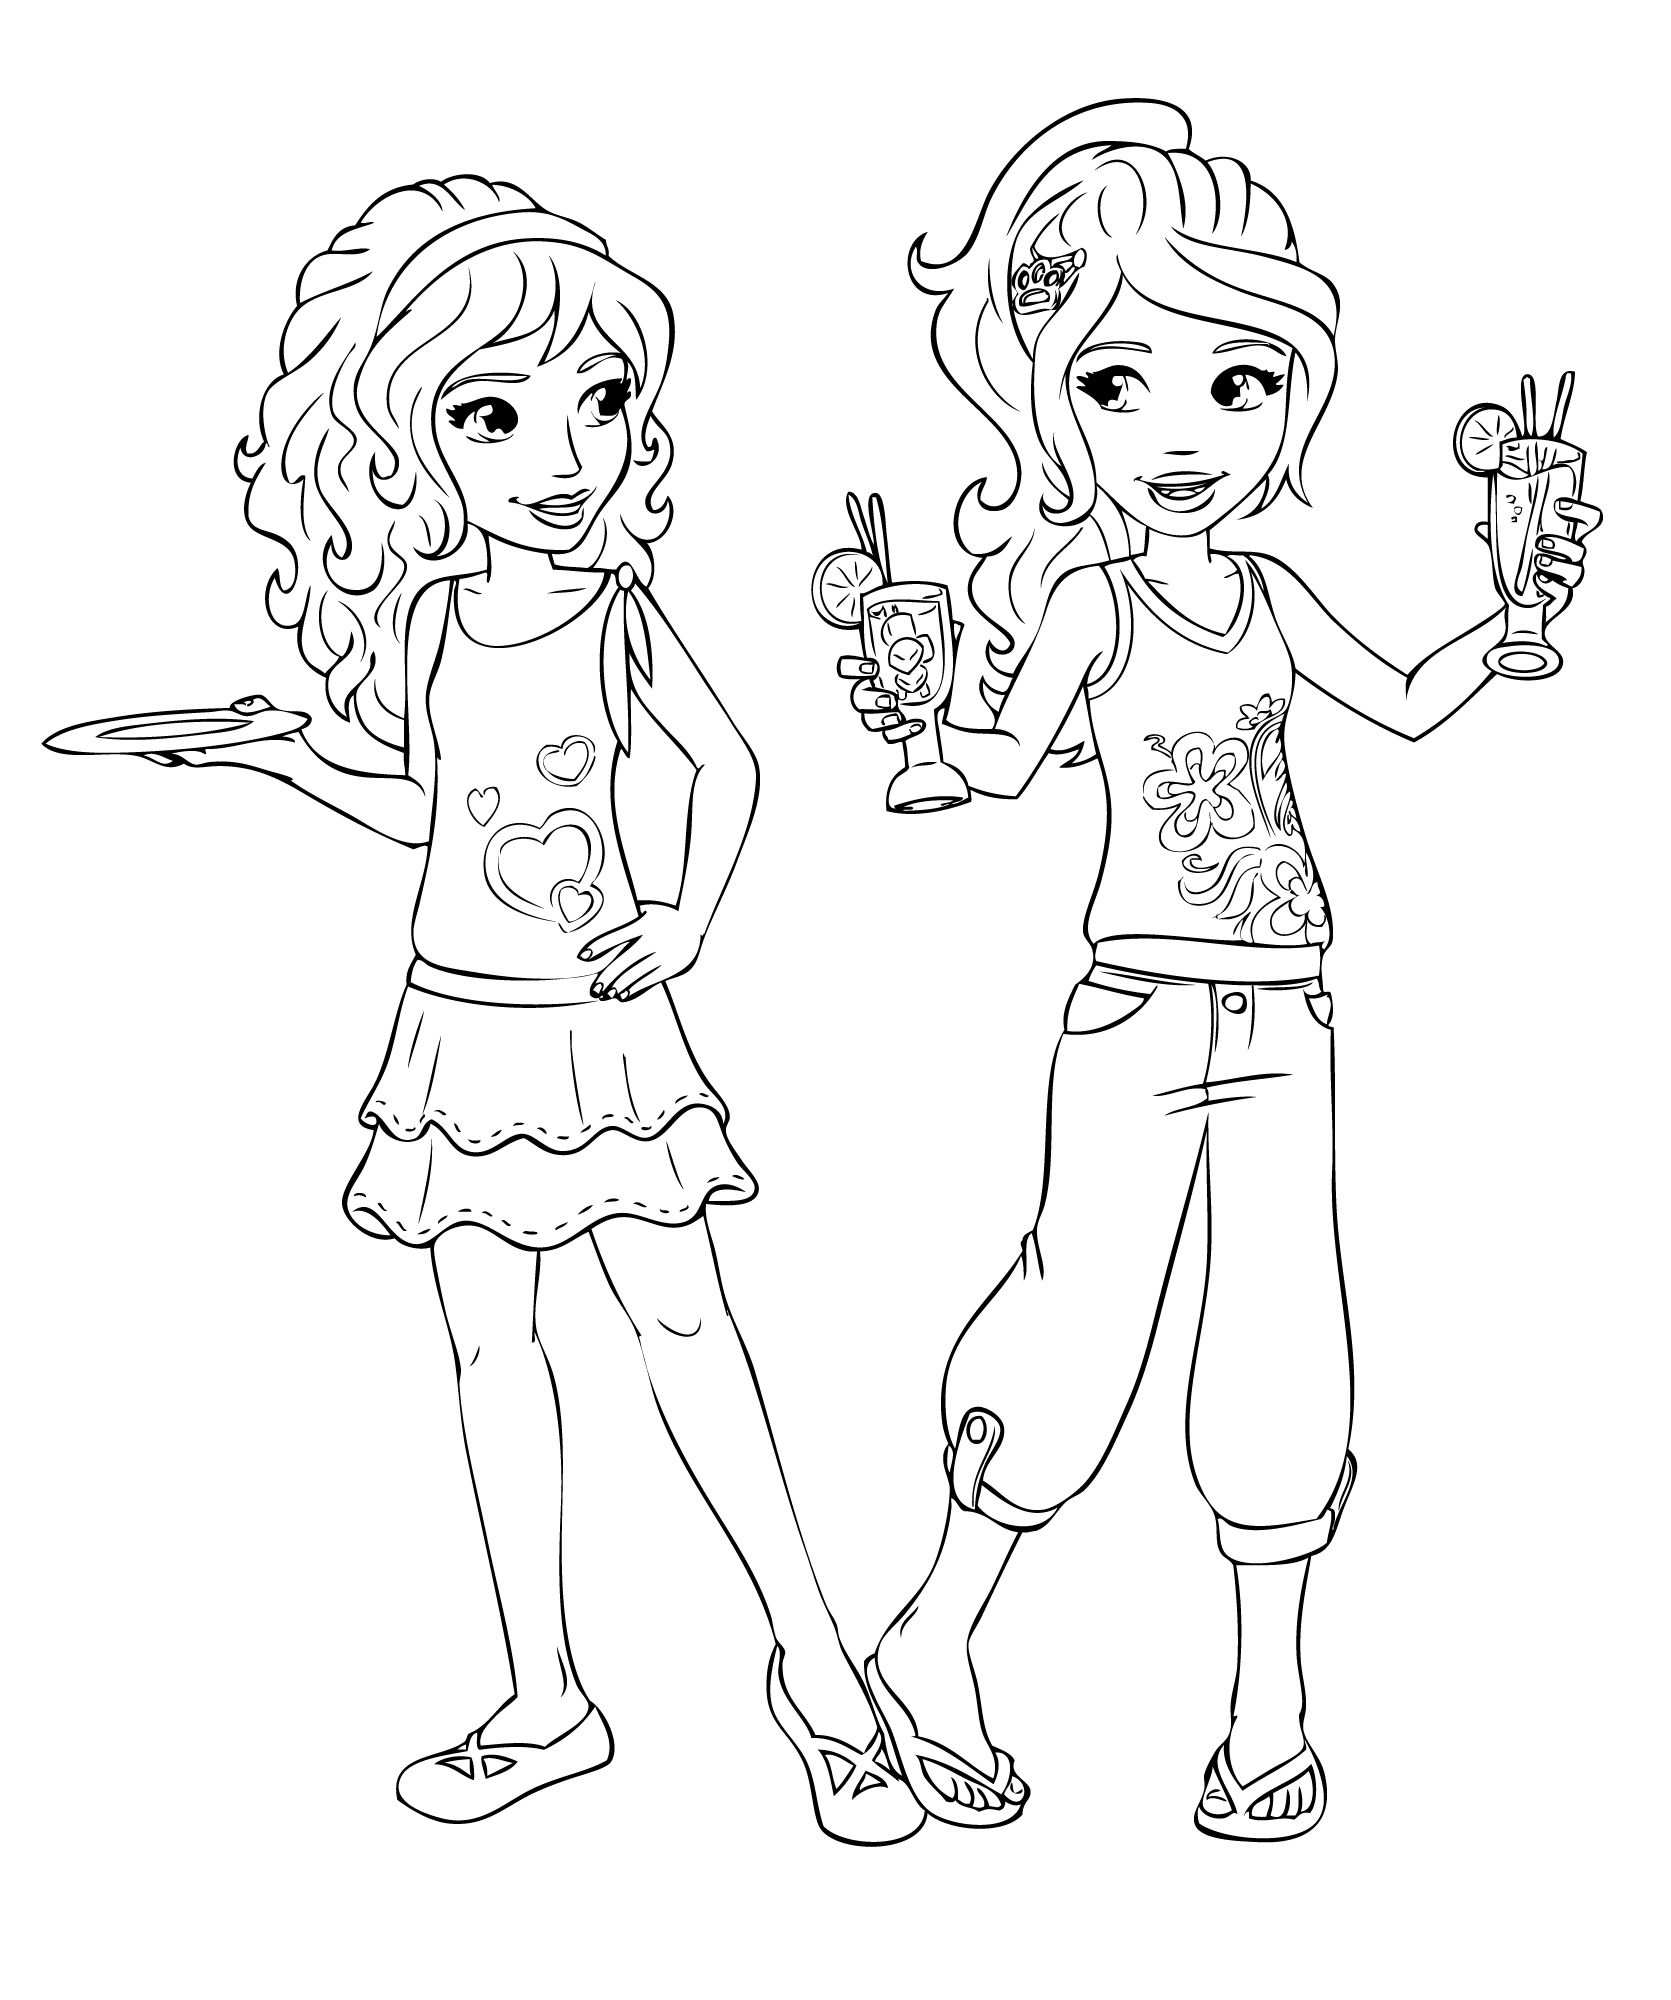 Lego Friends Coloring Pages Tagged With Best Friends Coloring